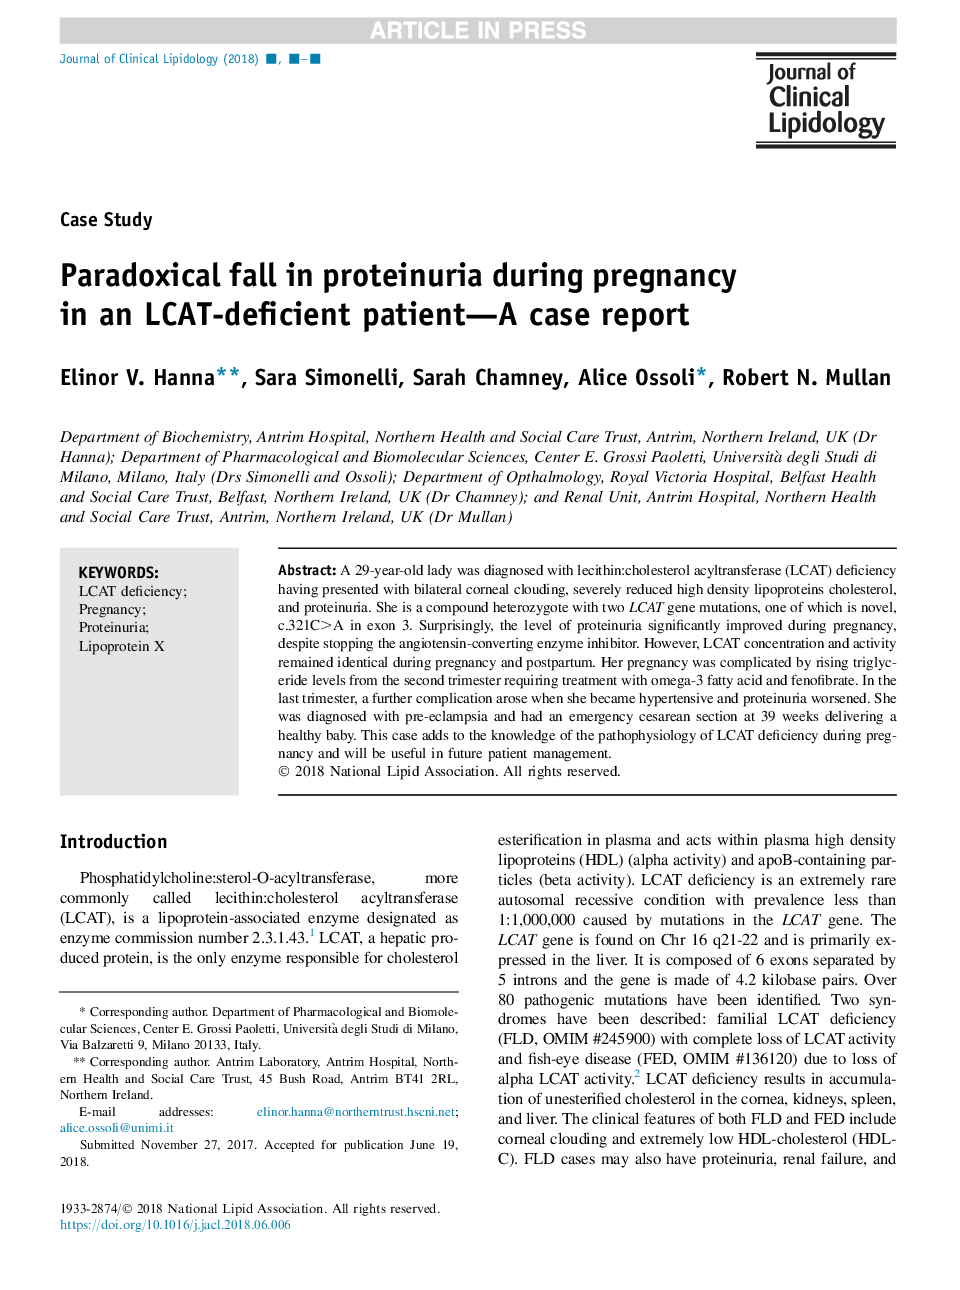 Paradoxical fall in proteinuria during pregnancy in an LCAT-deficient patient-A case report